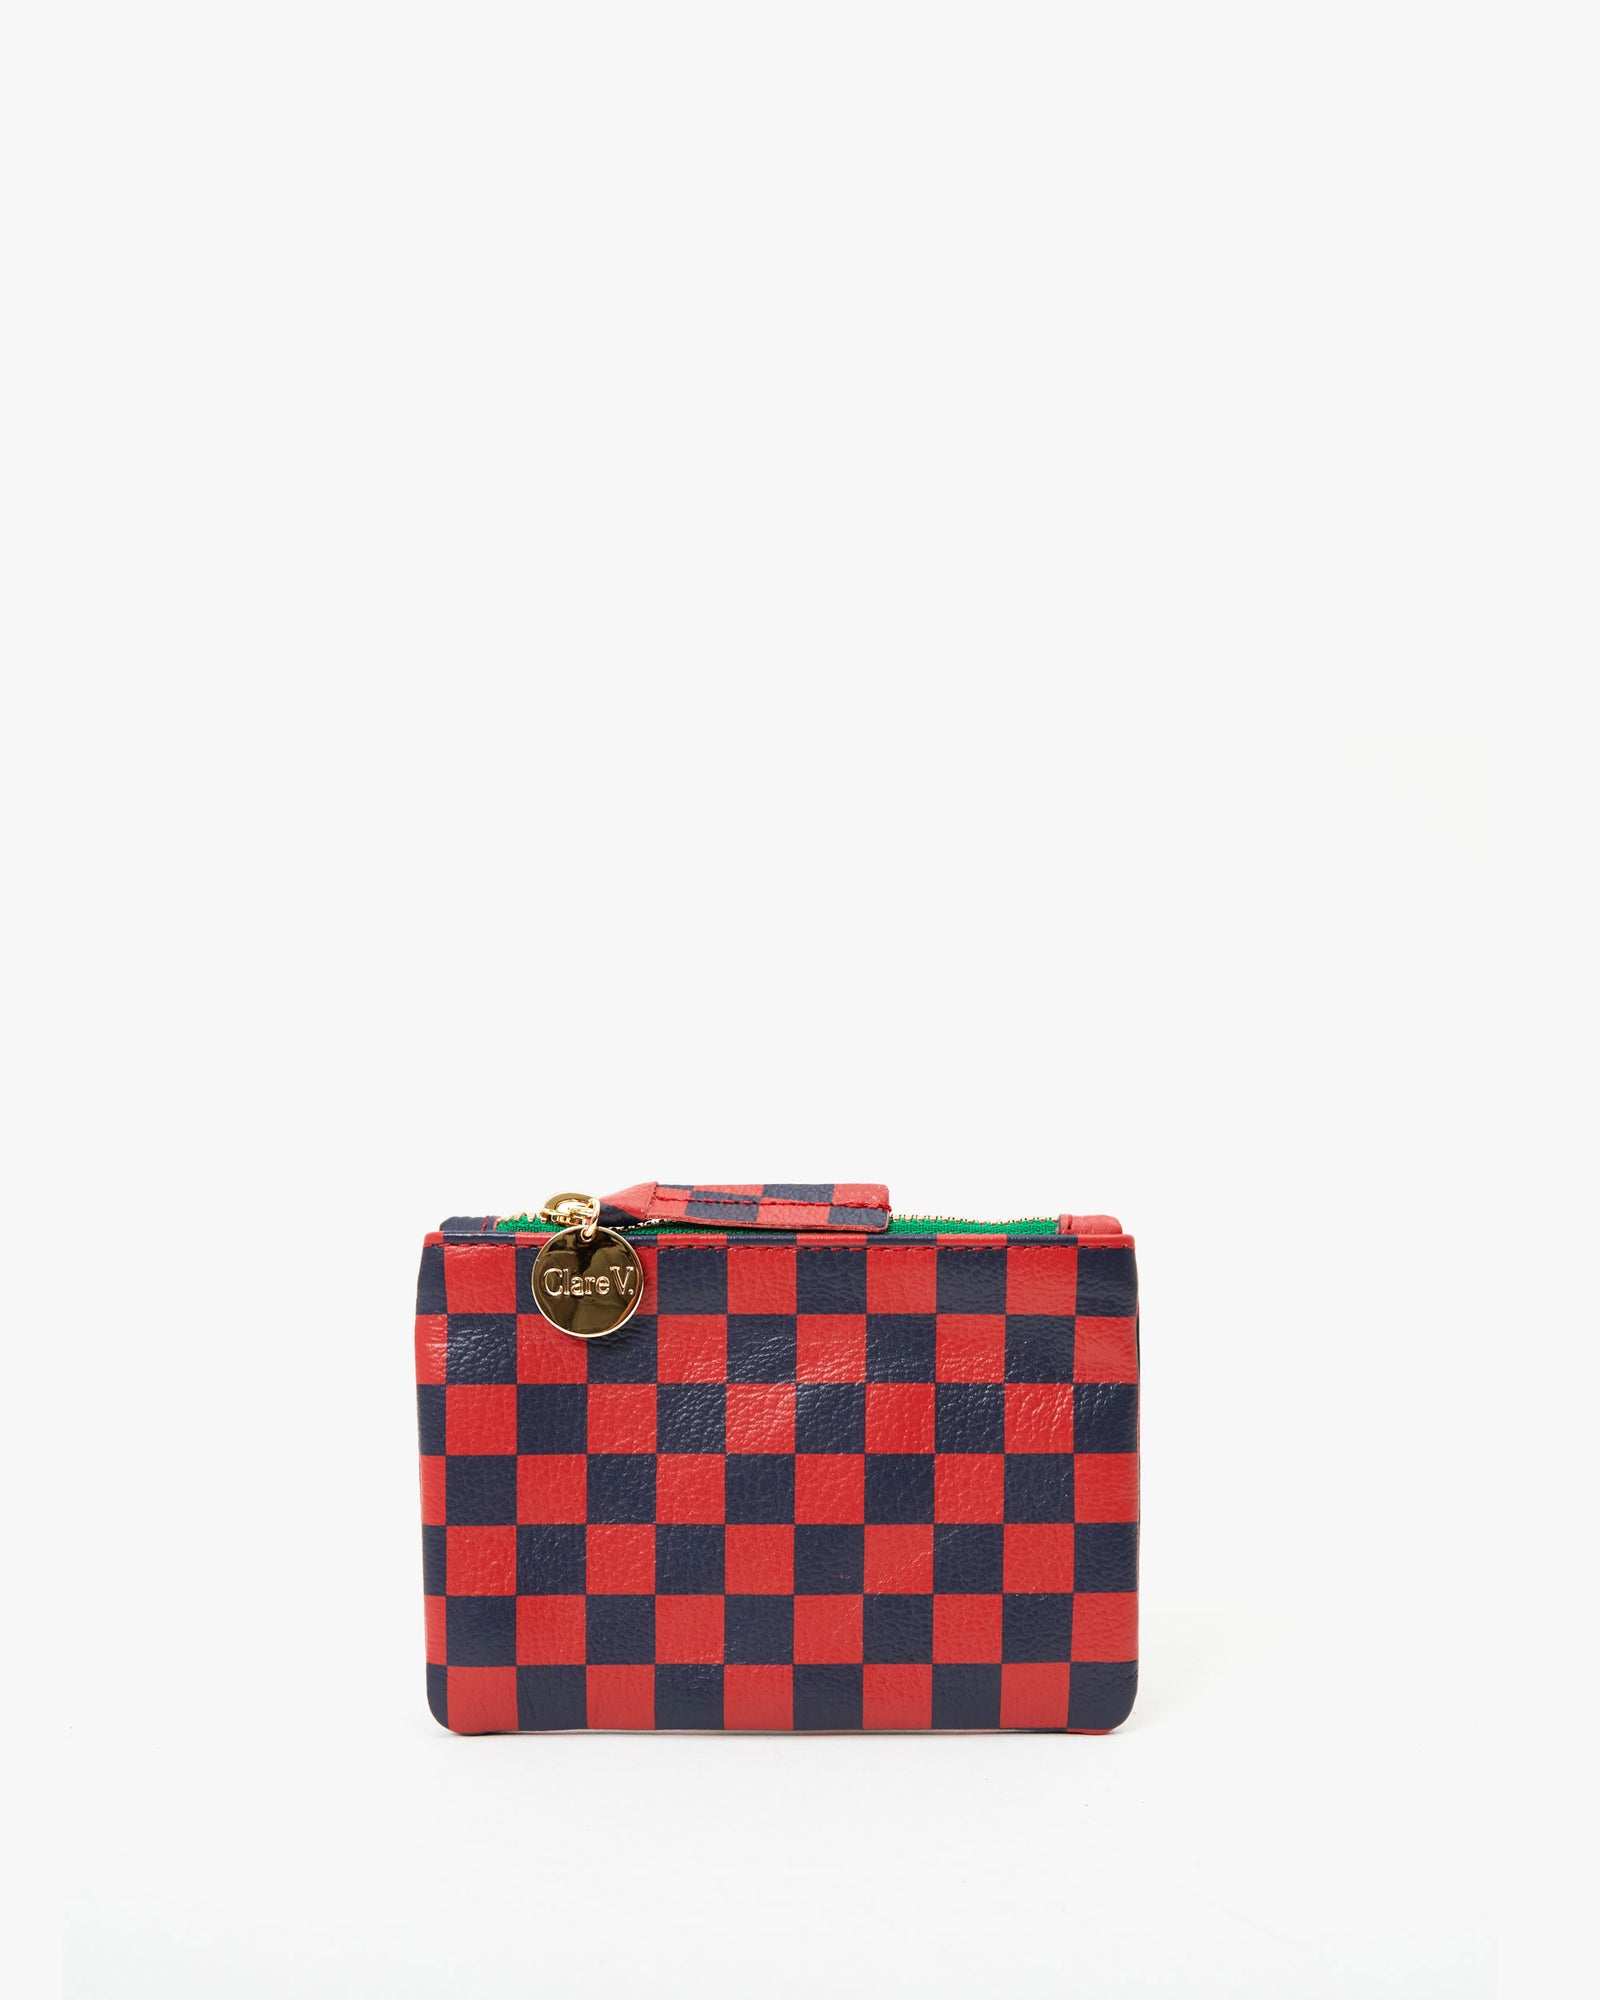 LV Leather Checkers Wallet for Men